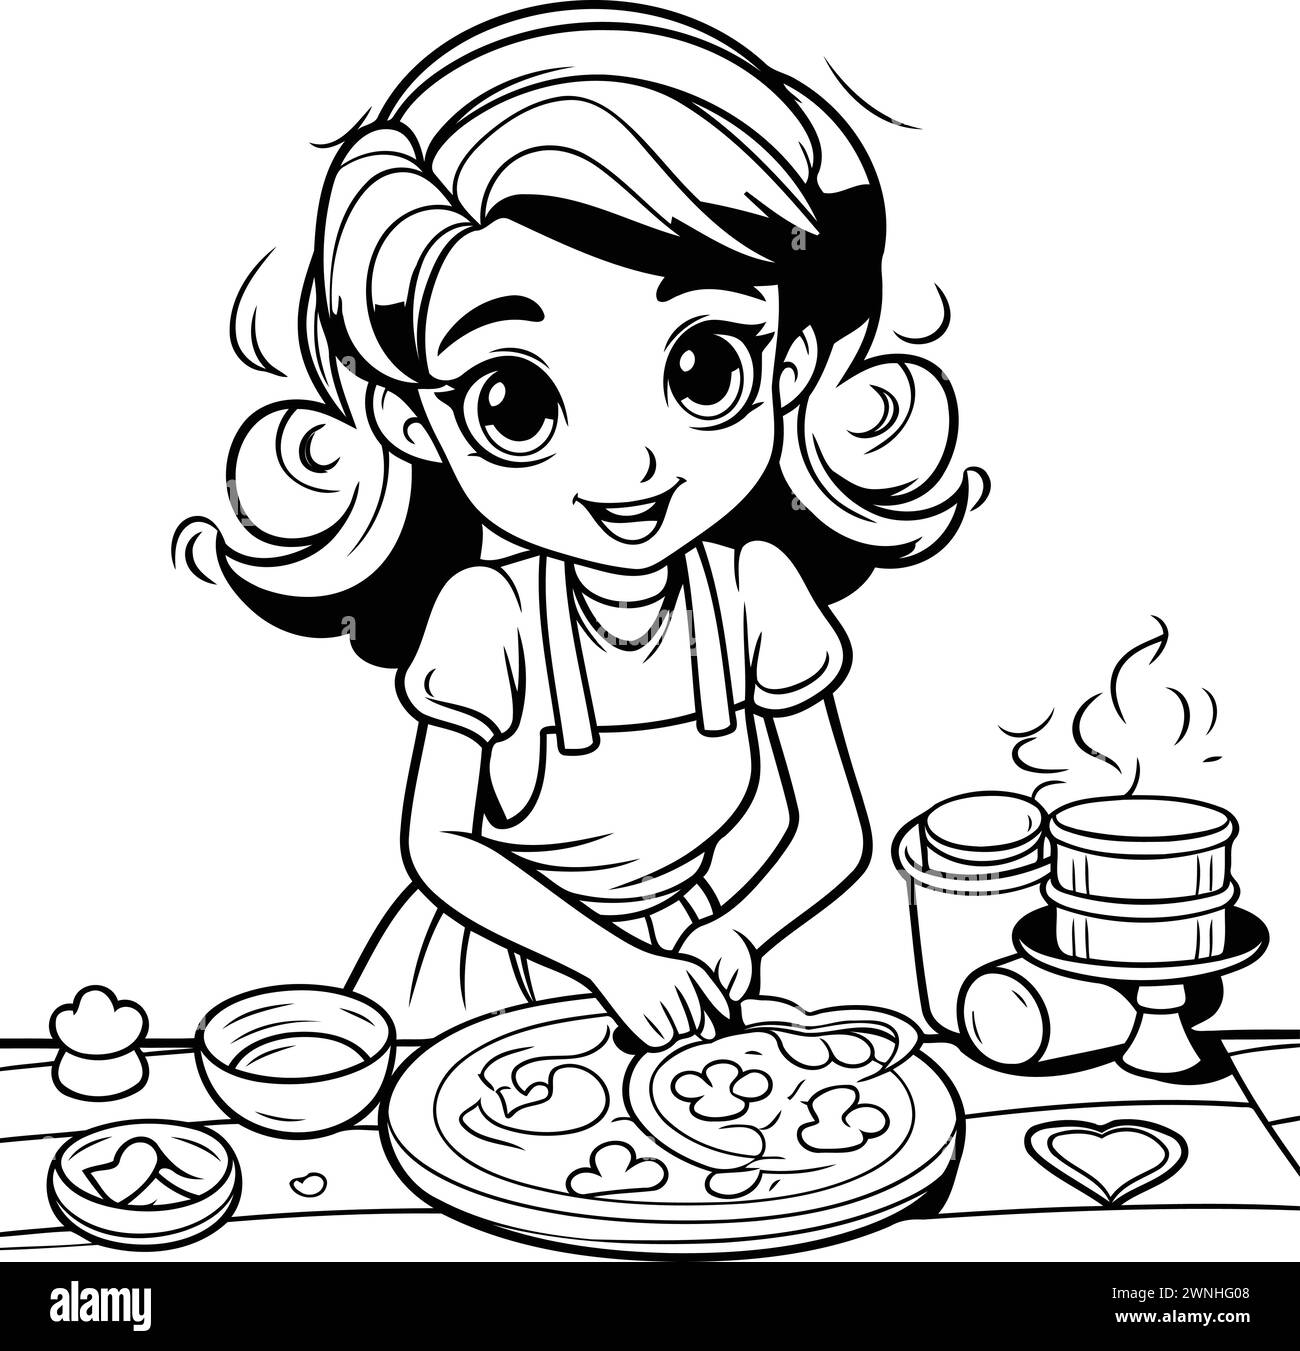 Cute girl cooking pizza. black and white vector illustration for coloring book Stock Vector